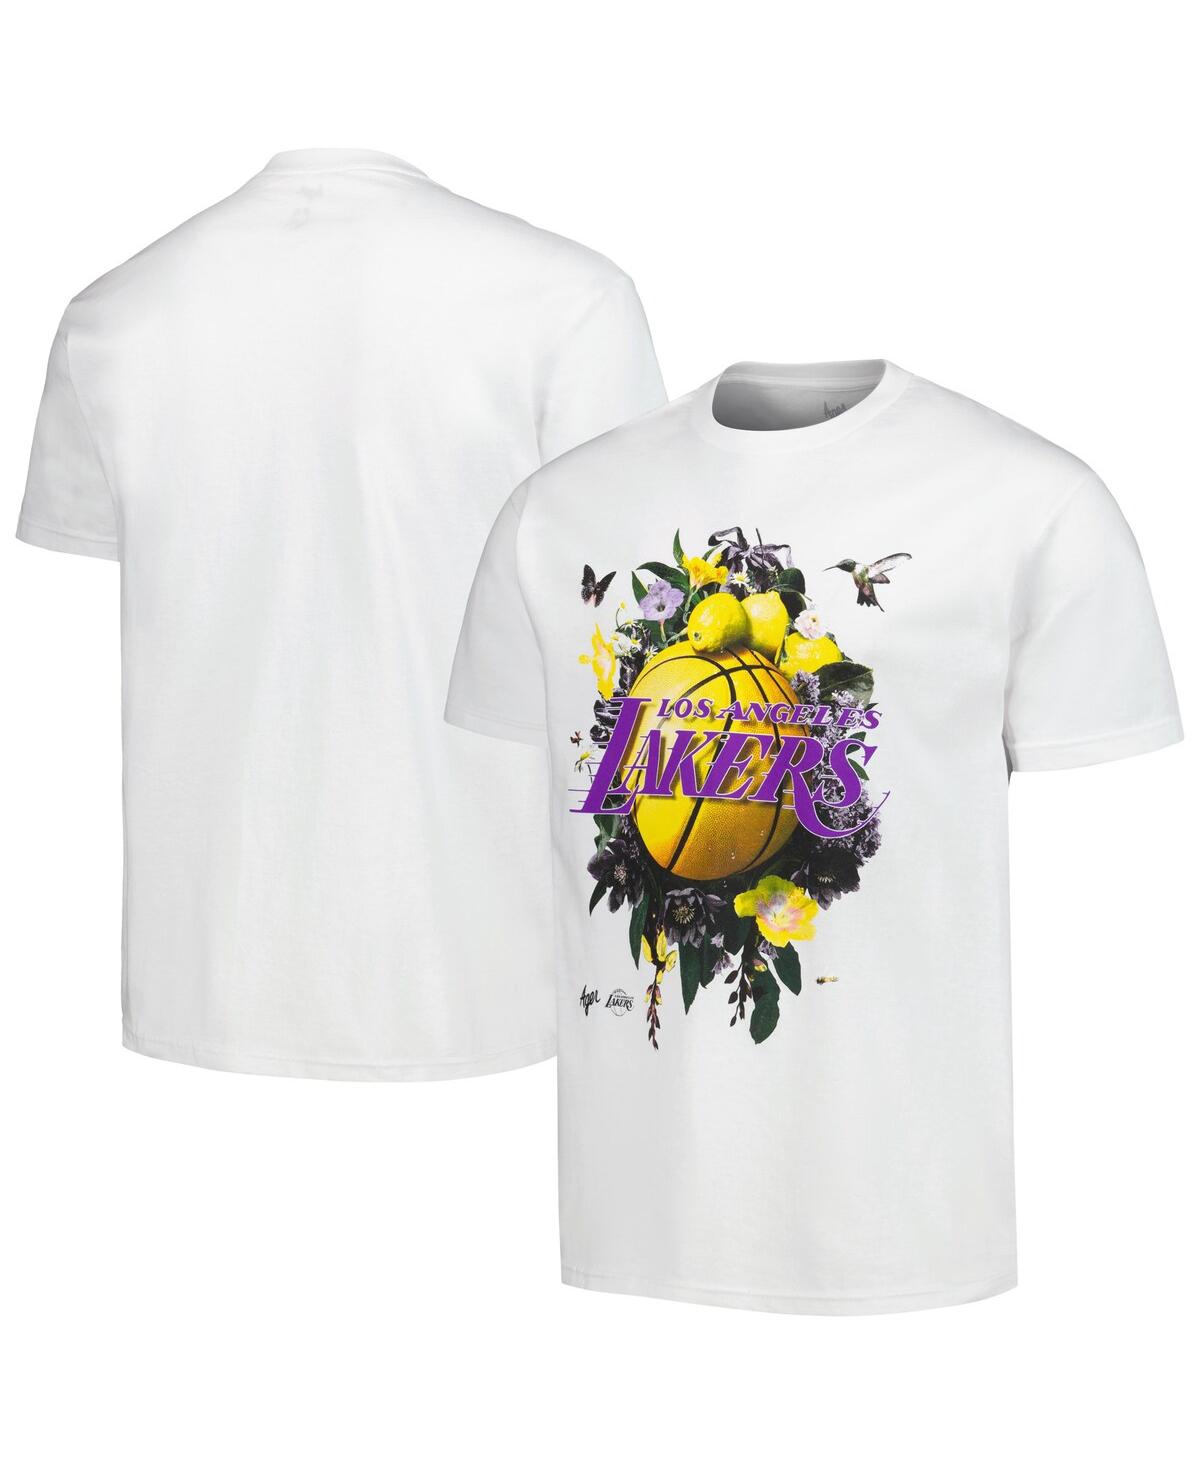 Men's and Women's Nba Exclusive Collection White Los Angeles Lakers Identify Artist Series T-shirt - White